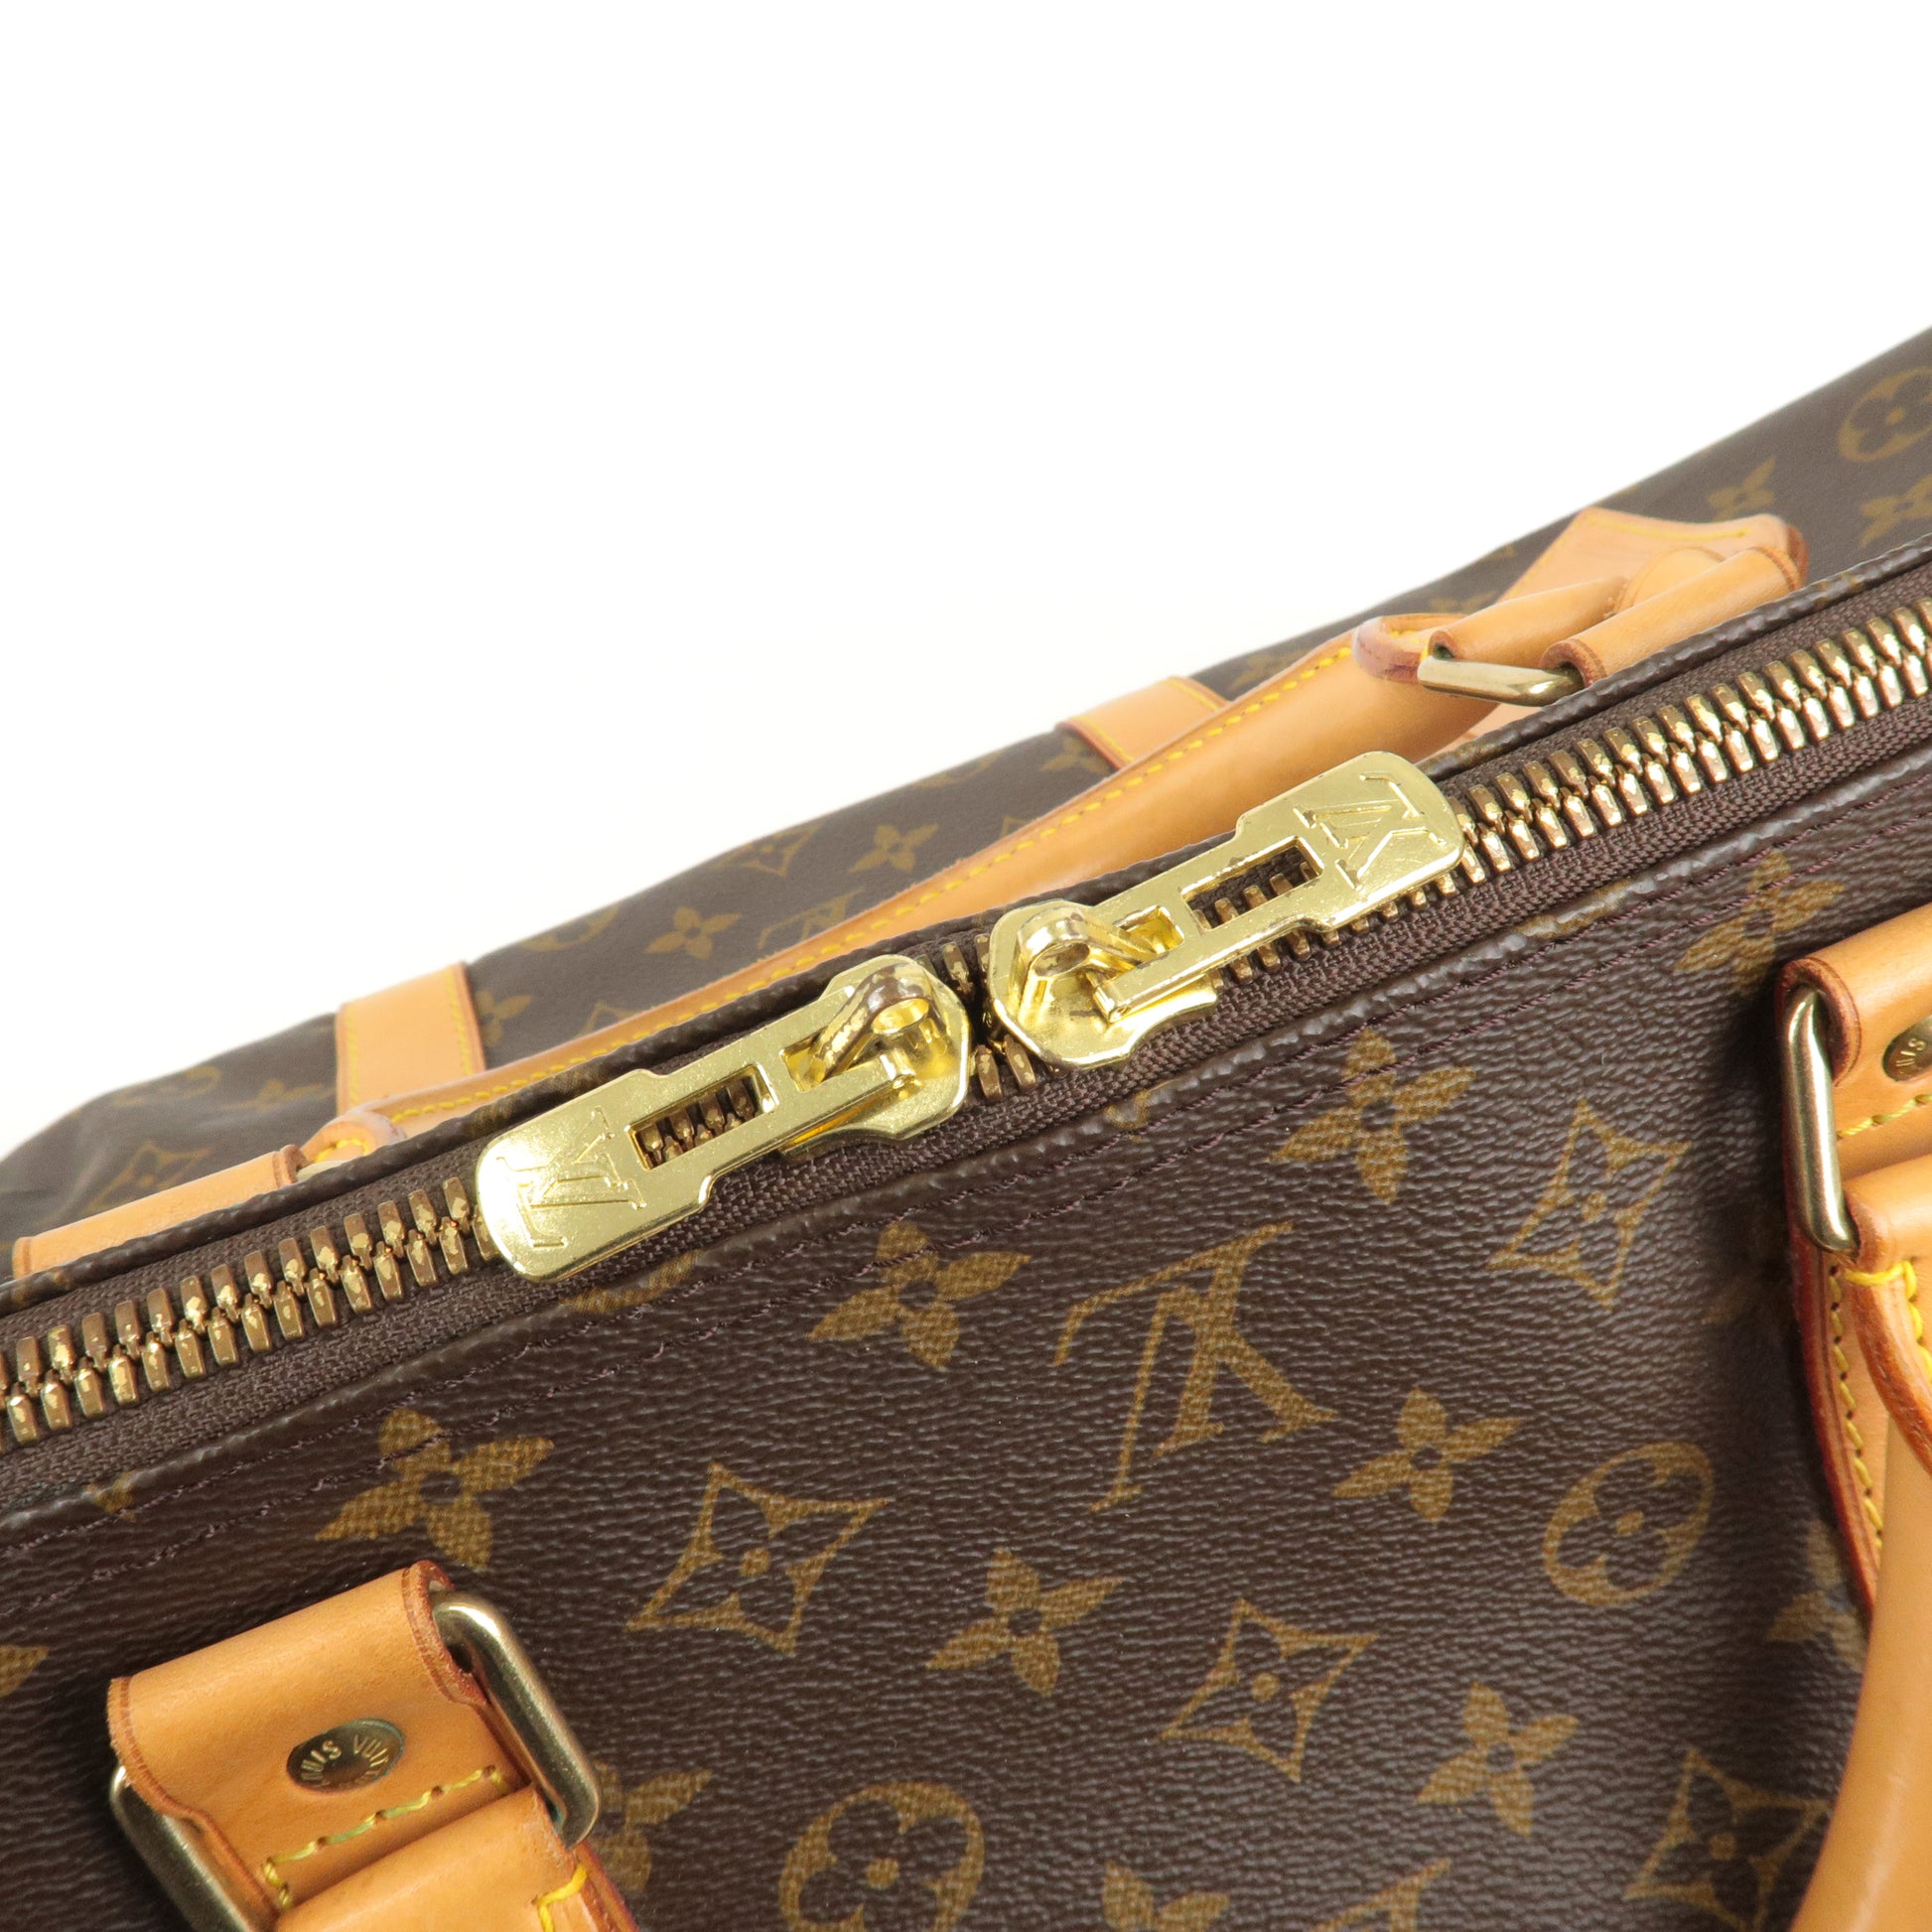 Louis Vuitton Keepall Bandouliere 60 M41412 – Timeless Vintage Company